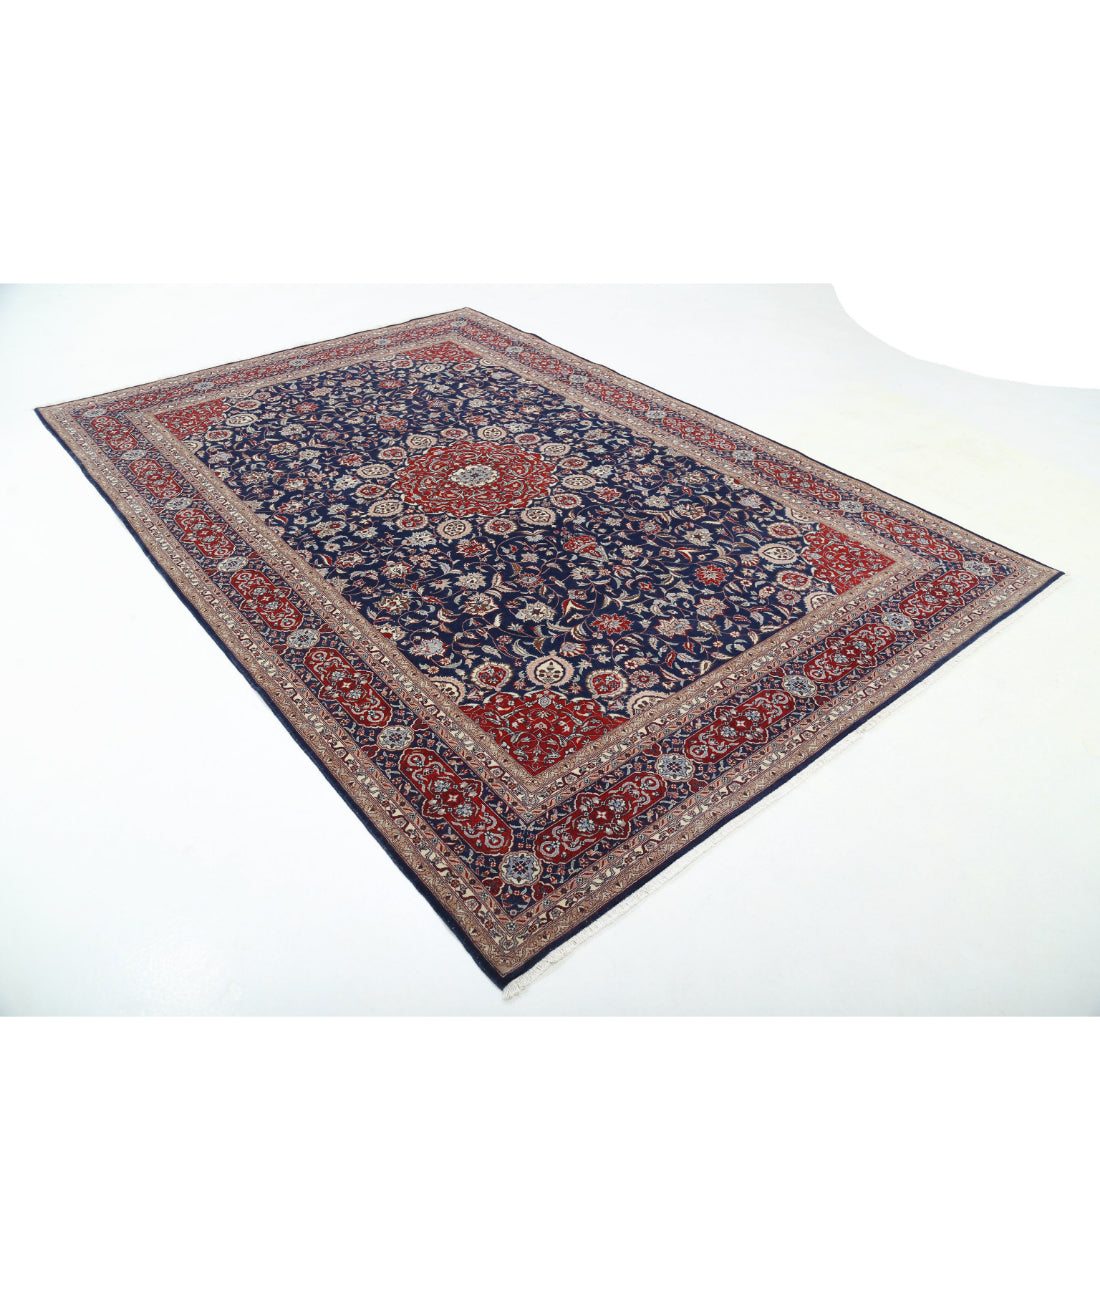 Hand Knotted Heritage Fine Persian Style Wool Rug - 6'8'' x 9'10'' 6'8'' x 9'10'' (200 X 295) / Blue / Red